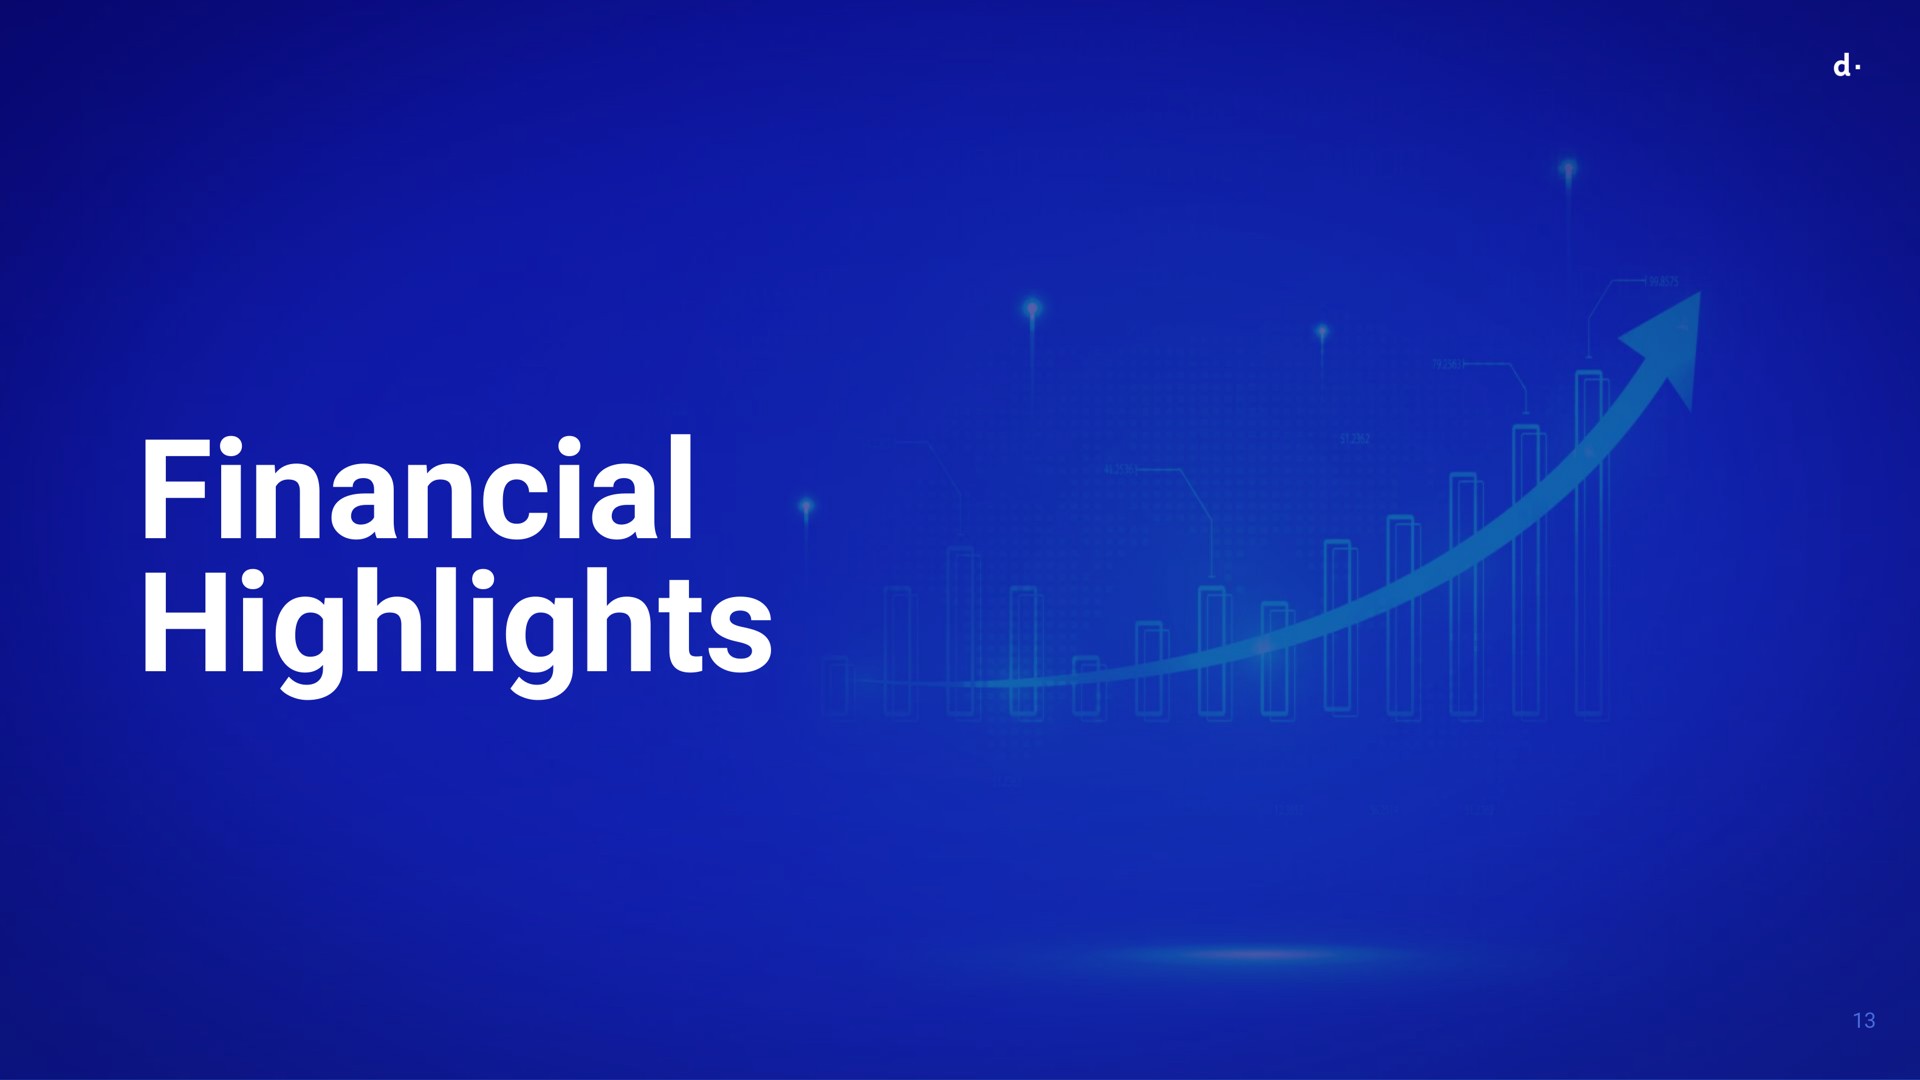 financial highlights | dLocal